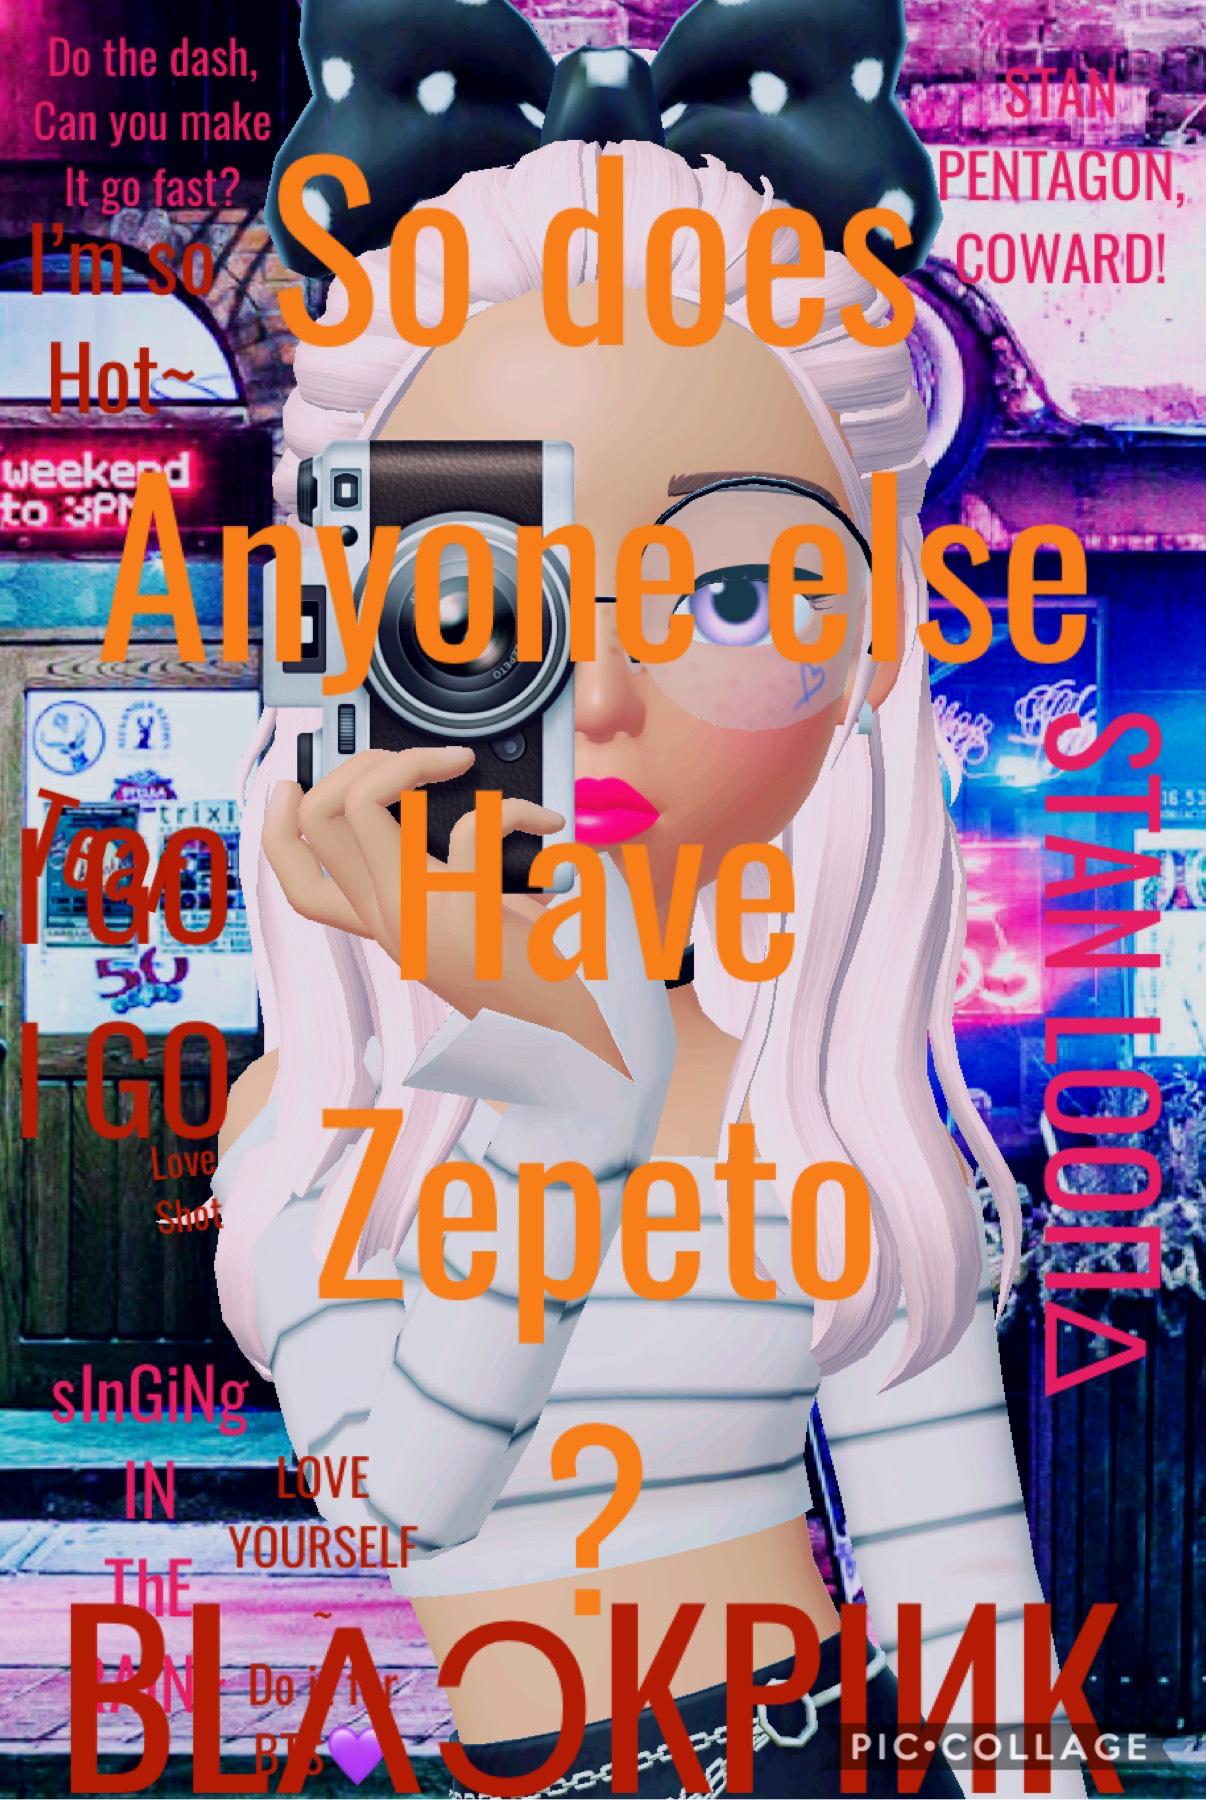 RIGHT! The whole reason I made this! Does anyone else have ZEPETO or is it just my lame self?